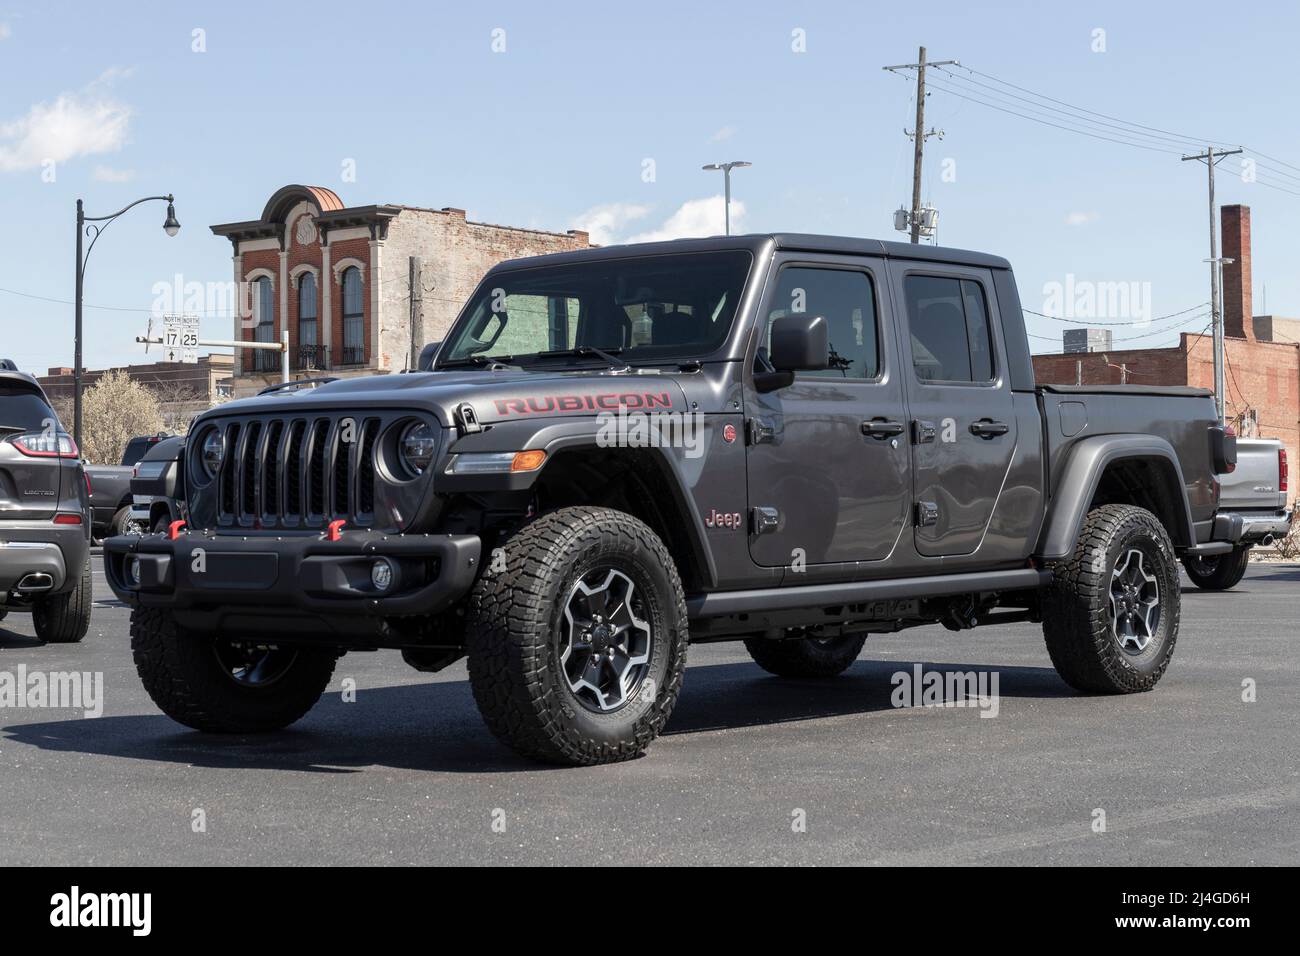 Logansport - Circa April 2022: Jeep Gladiator display at a Stellantis dealer. The Jeep Gladiator models include the Sport, Willys, Rubicon and Mojave. Stock Photo